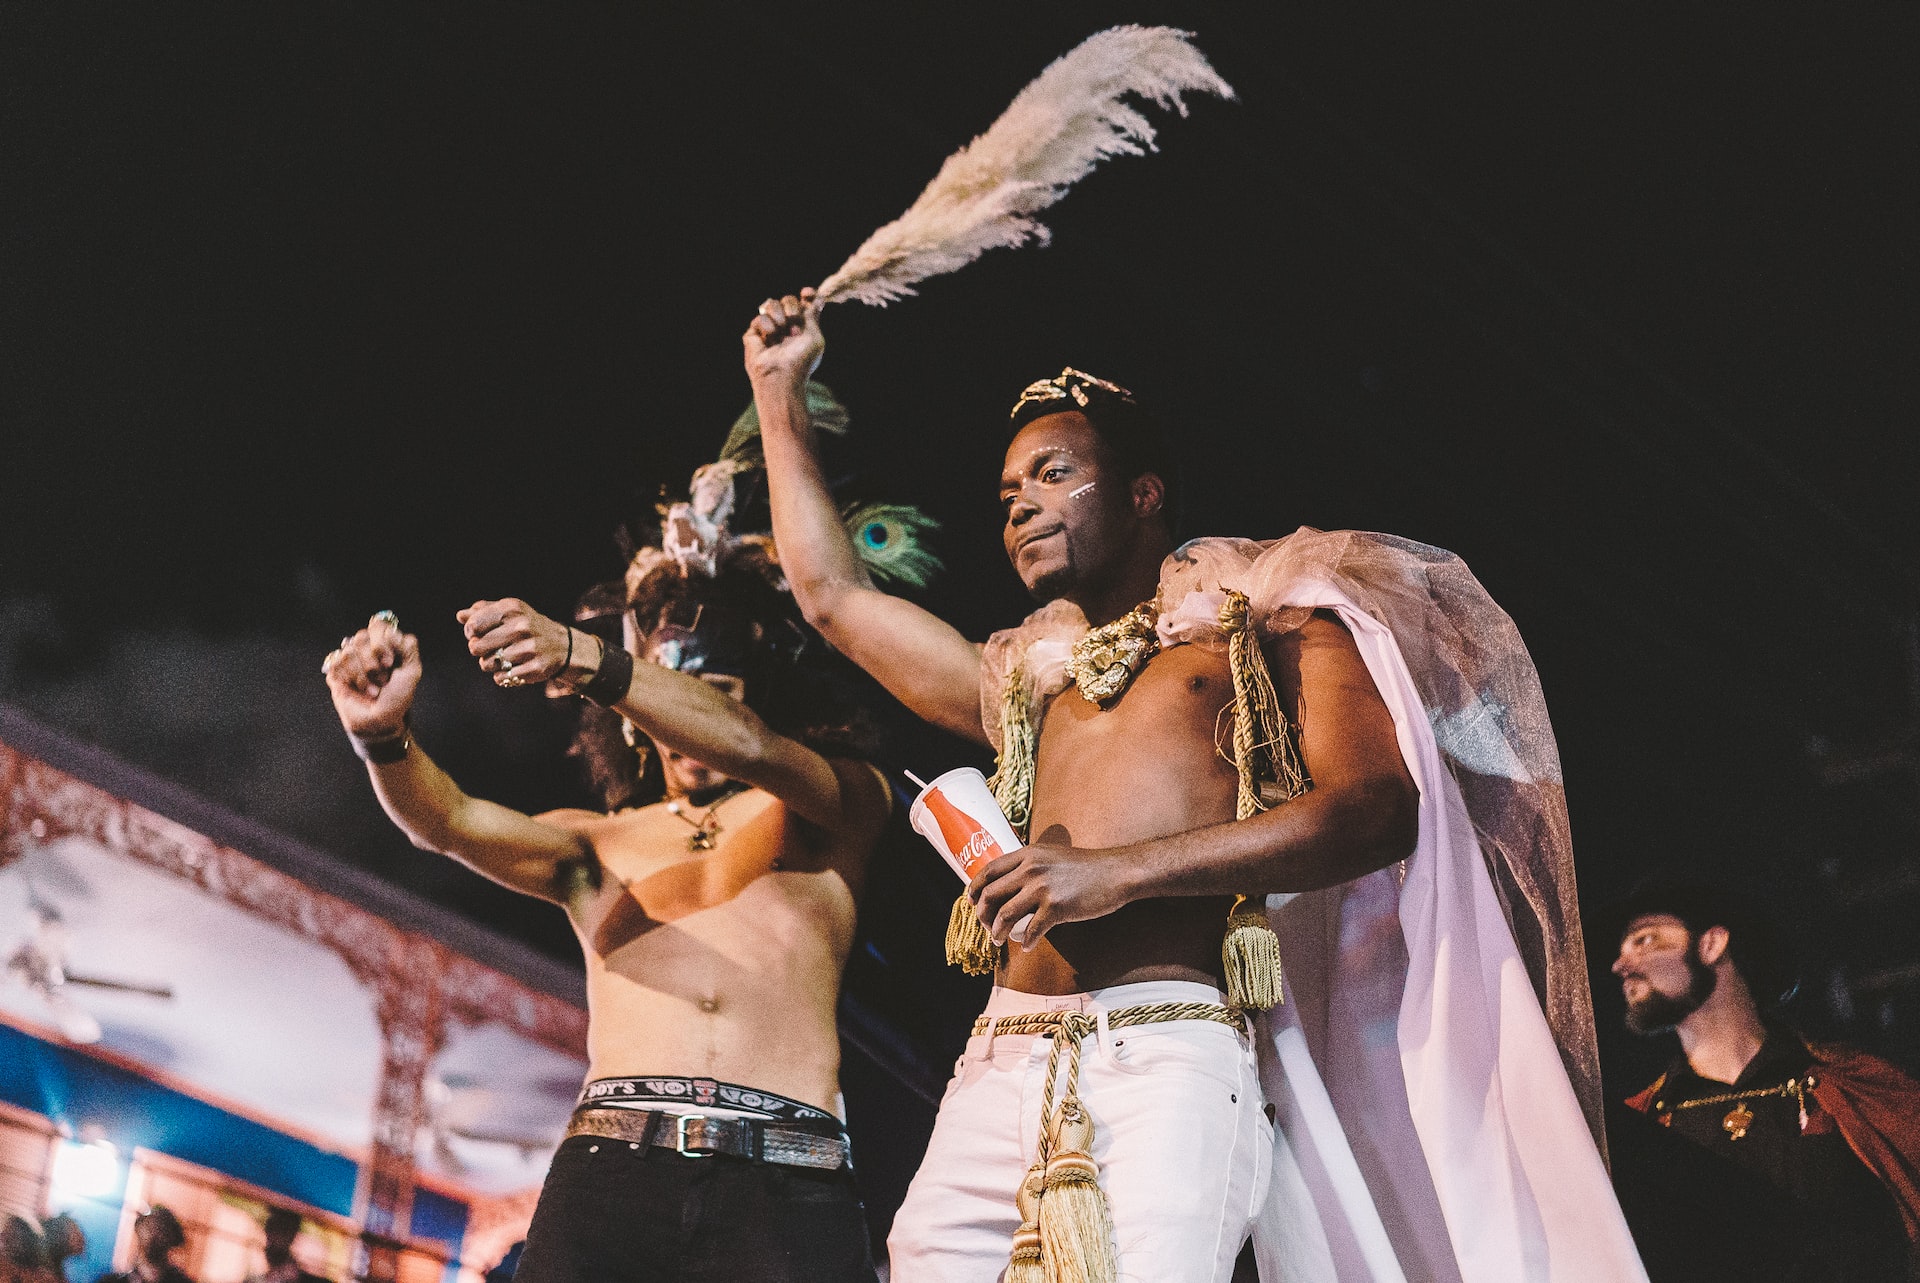 Two men in Carnival attire partying in New Orleans.